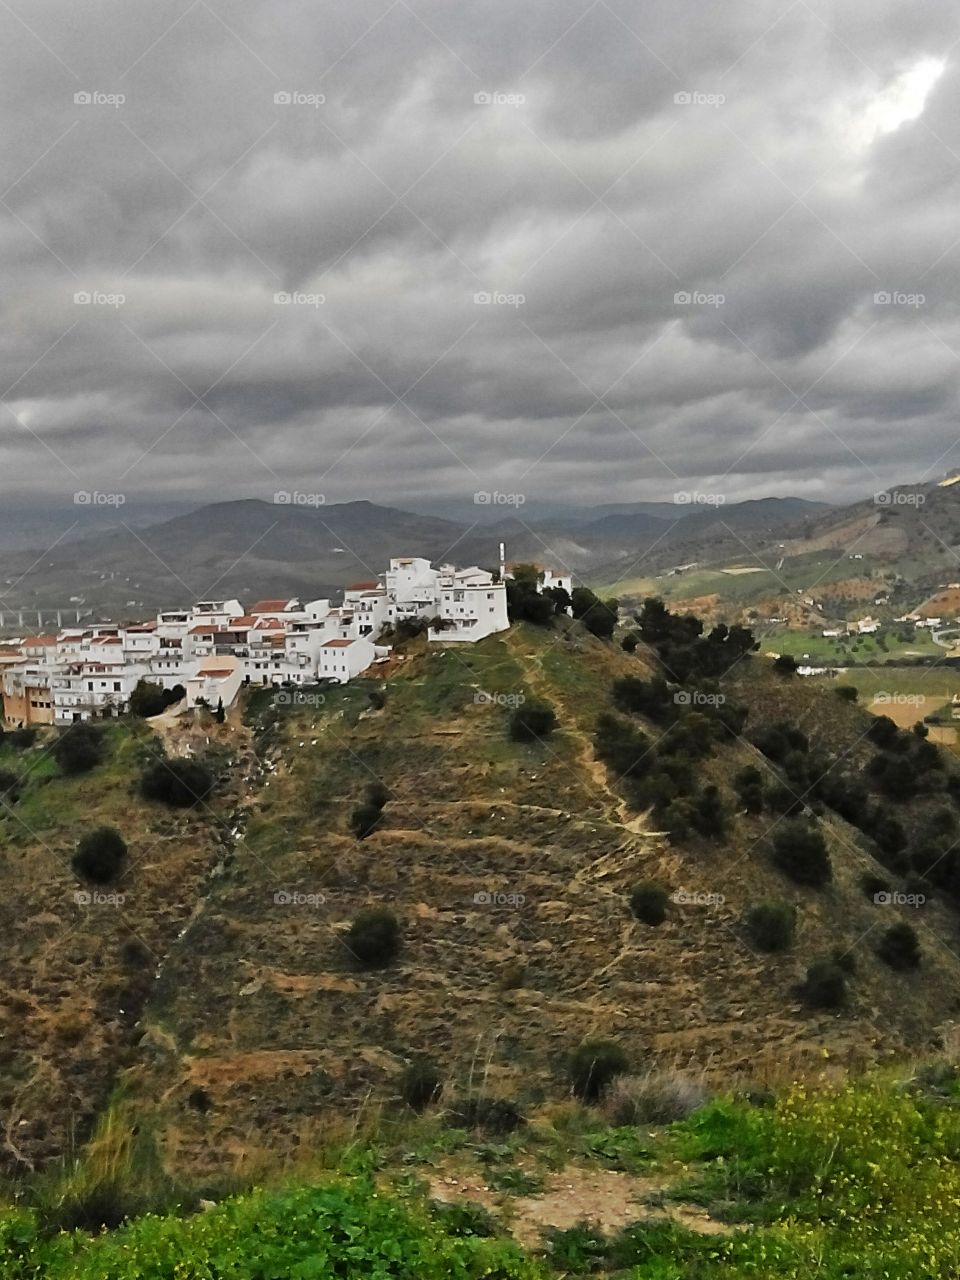 Views of Andalucia, Spain